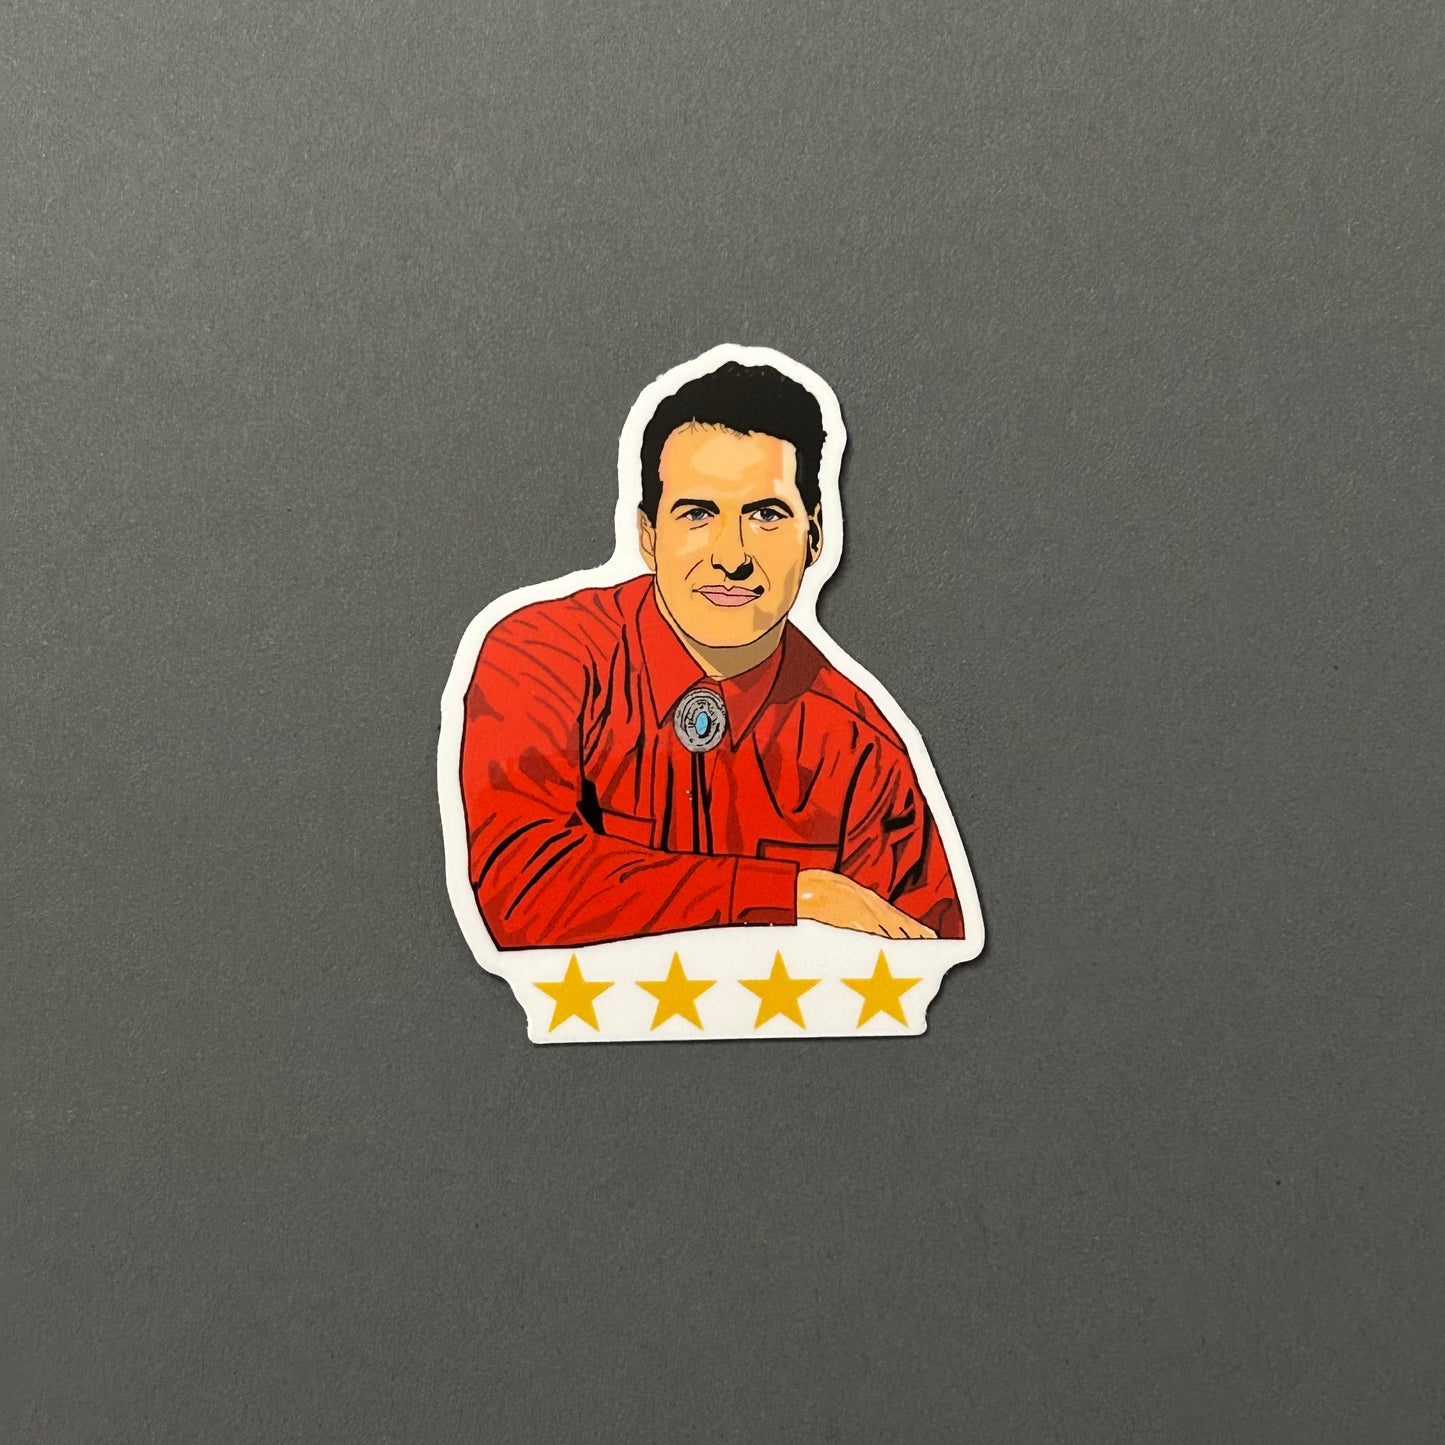 “4-Star Review” Sticker